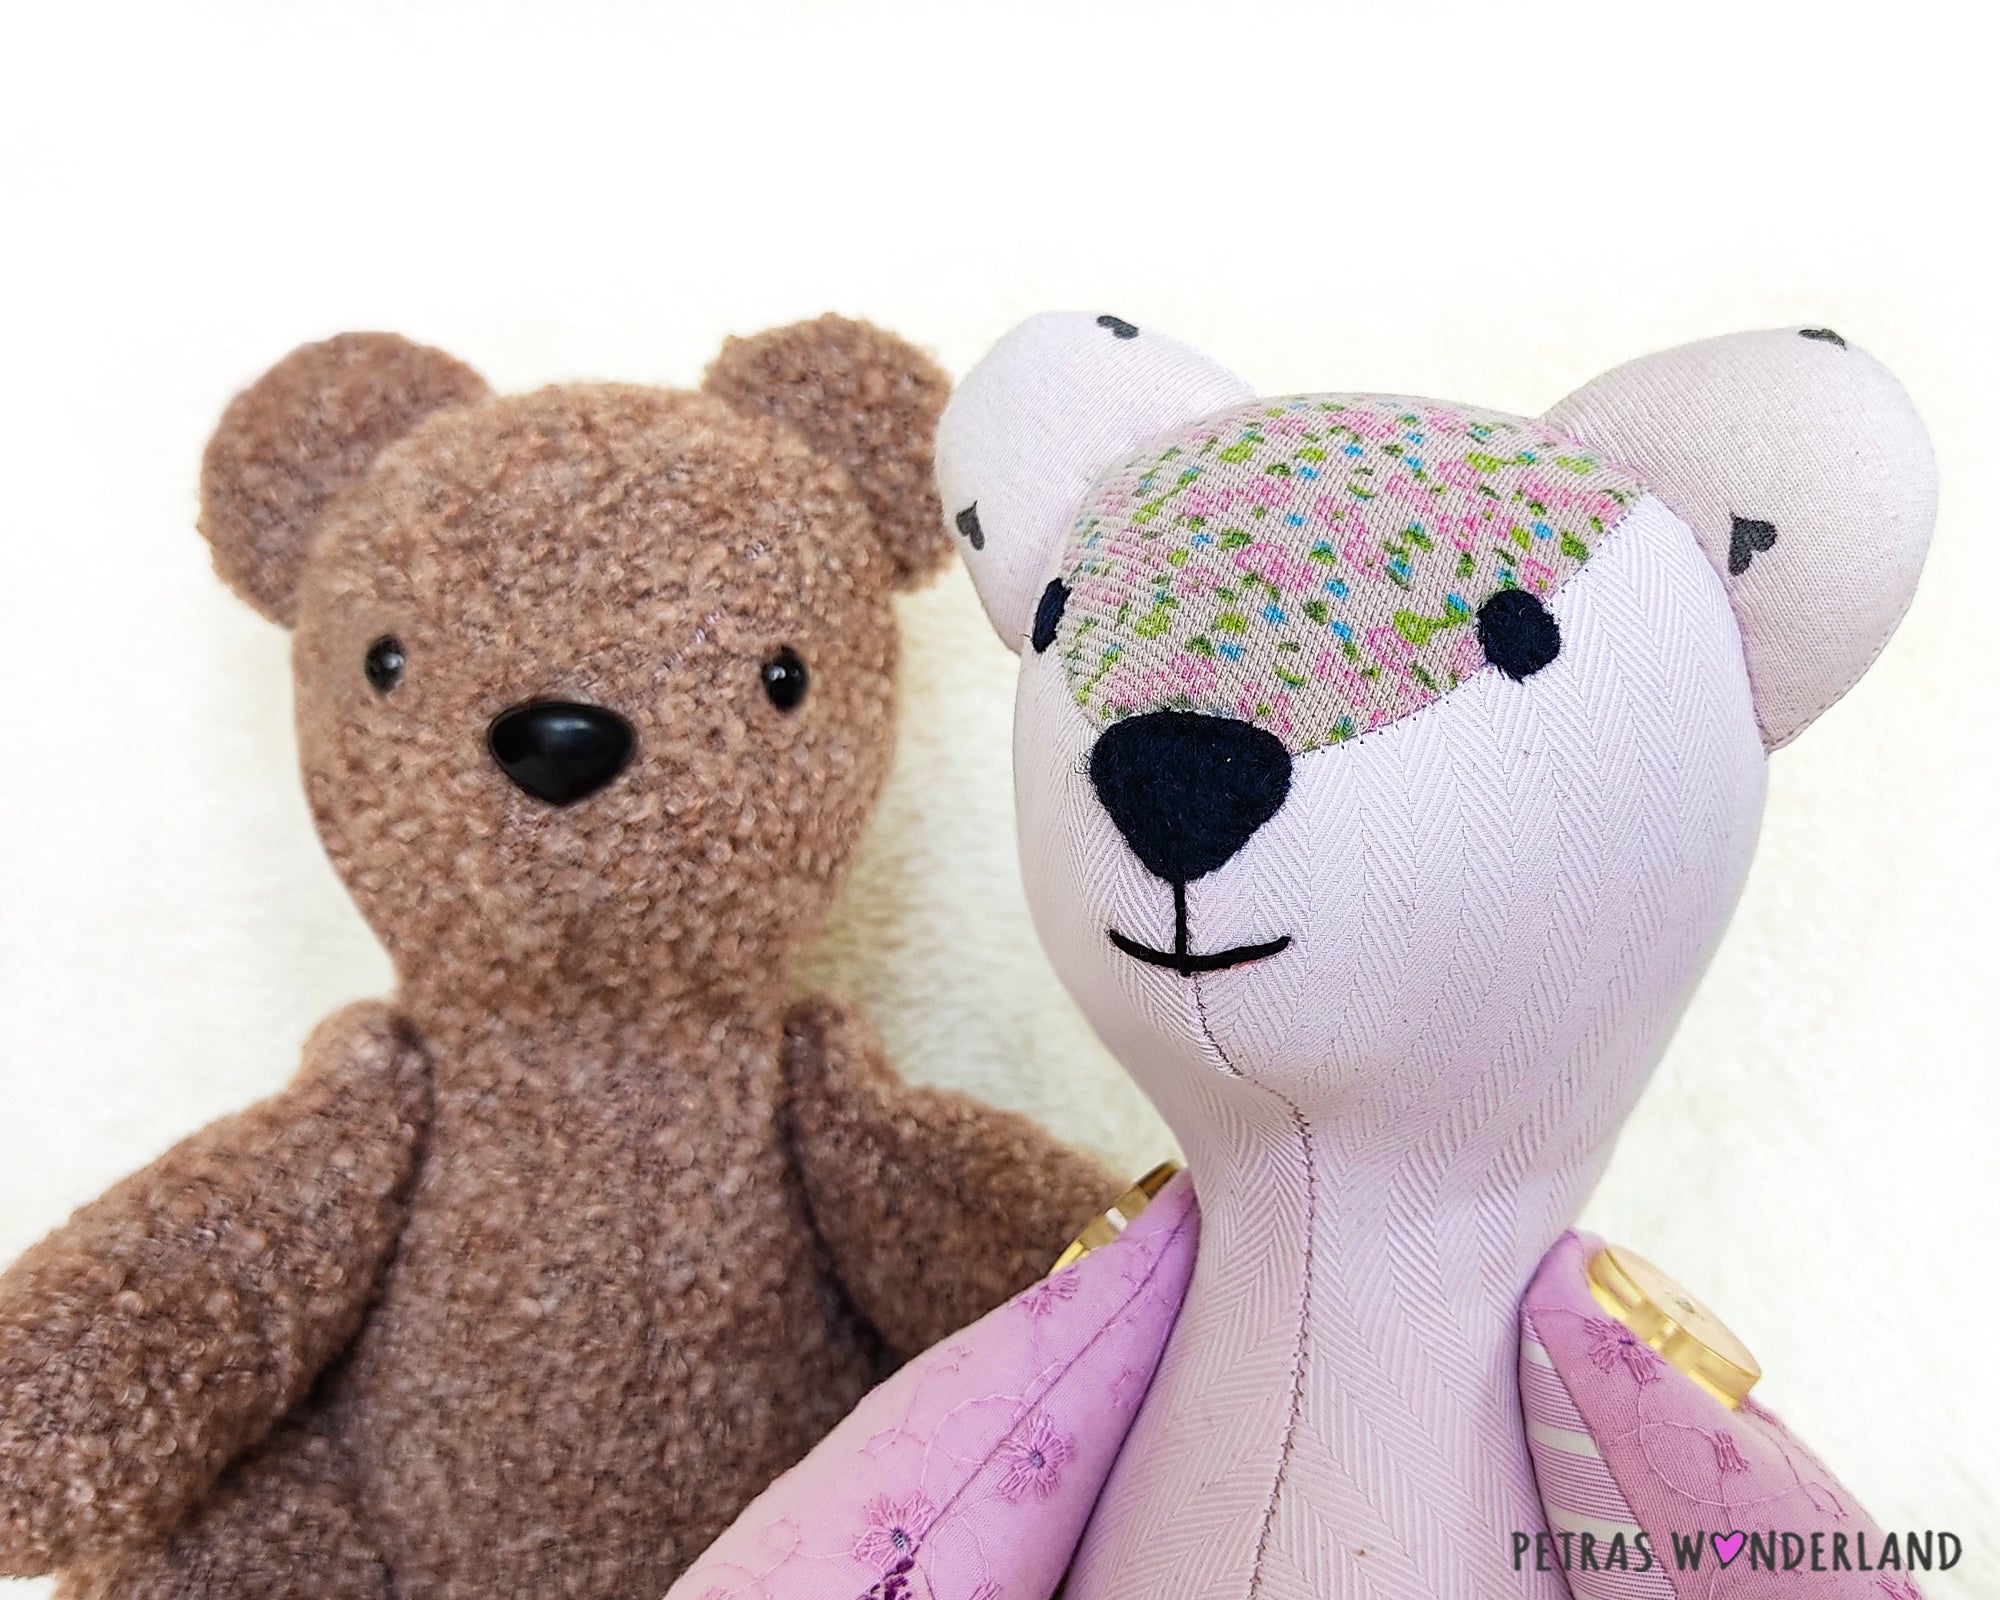 Memory Bear 9 inches - PDF sewing pattern and tutorial – Petras Wonderland